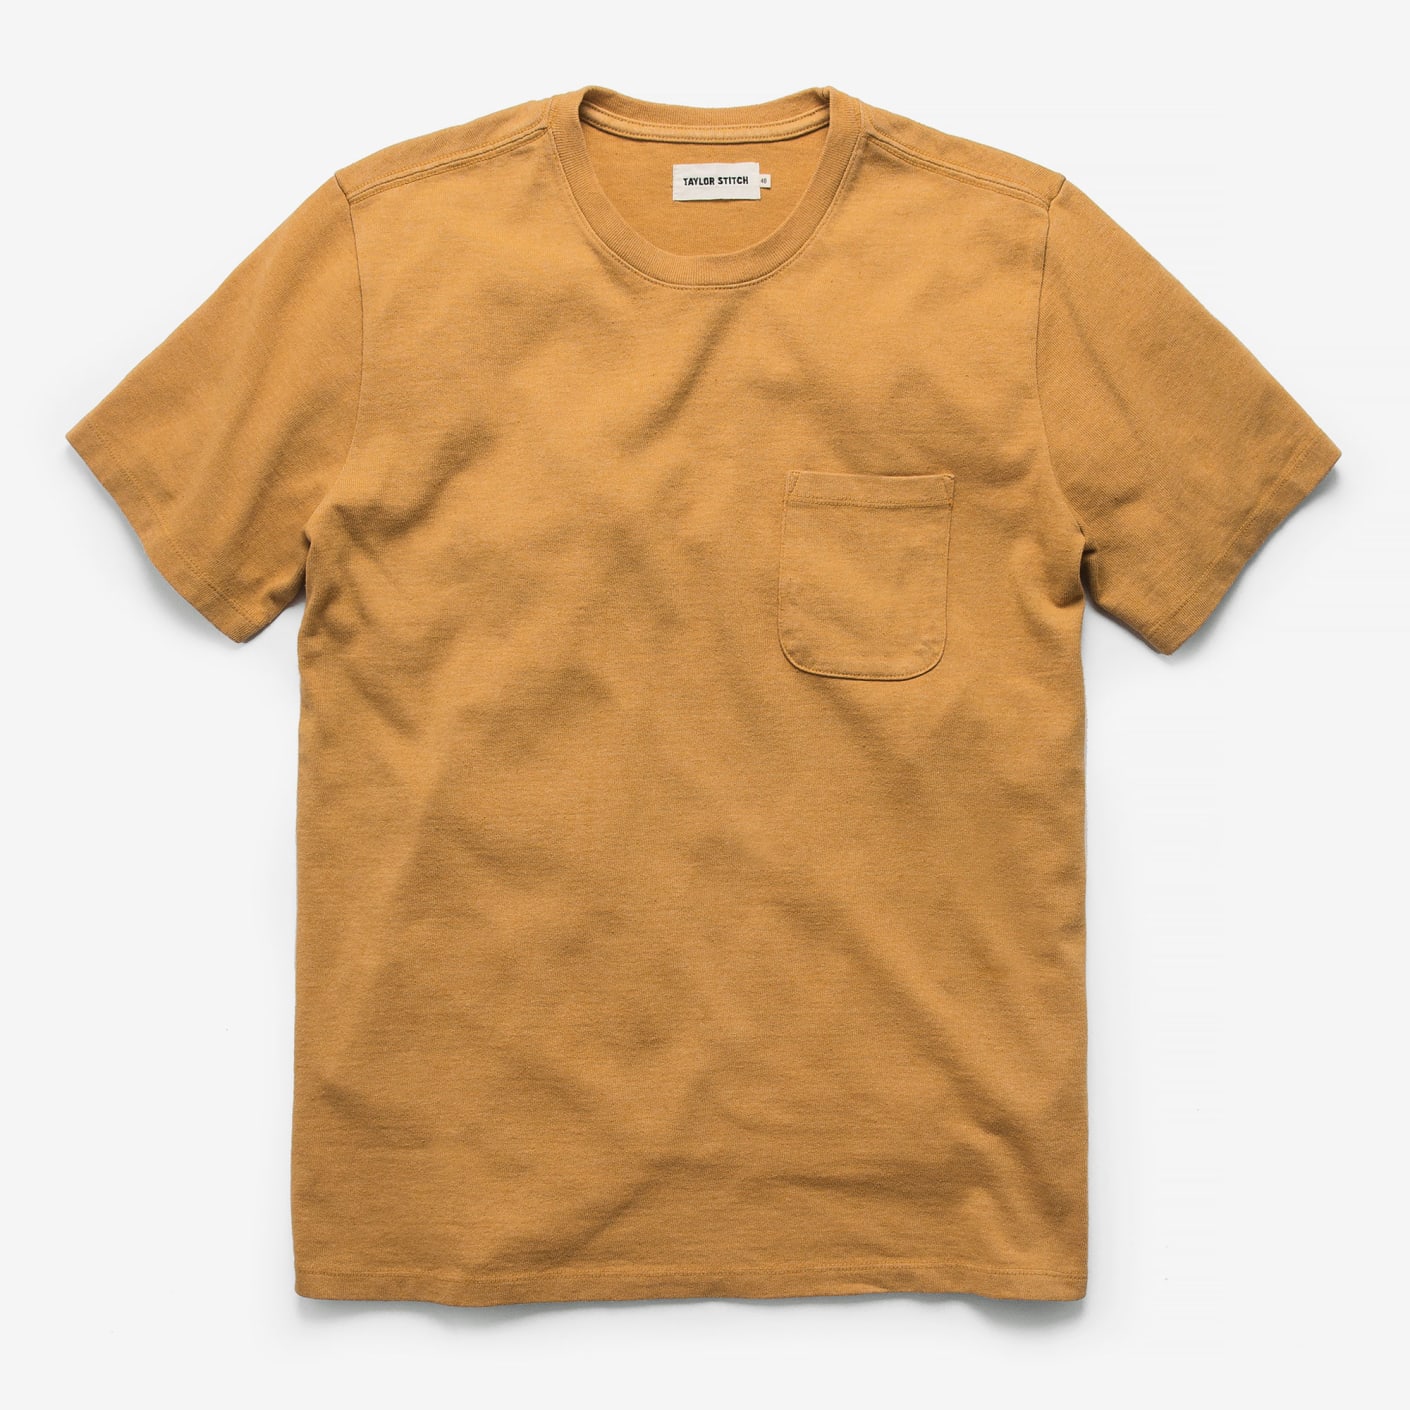 Taylor Stitch, The Heavy Bag Tee, Canary